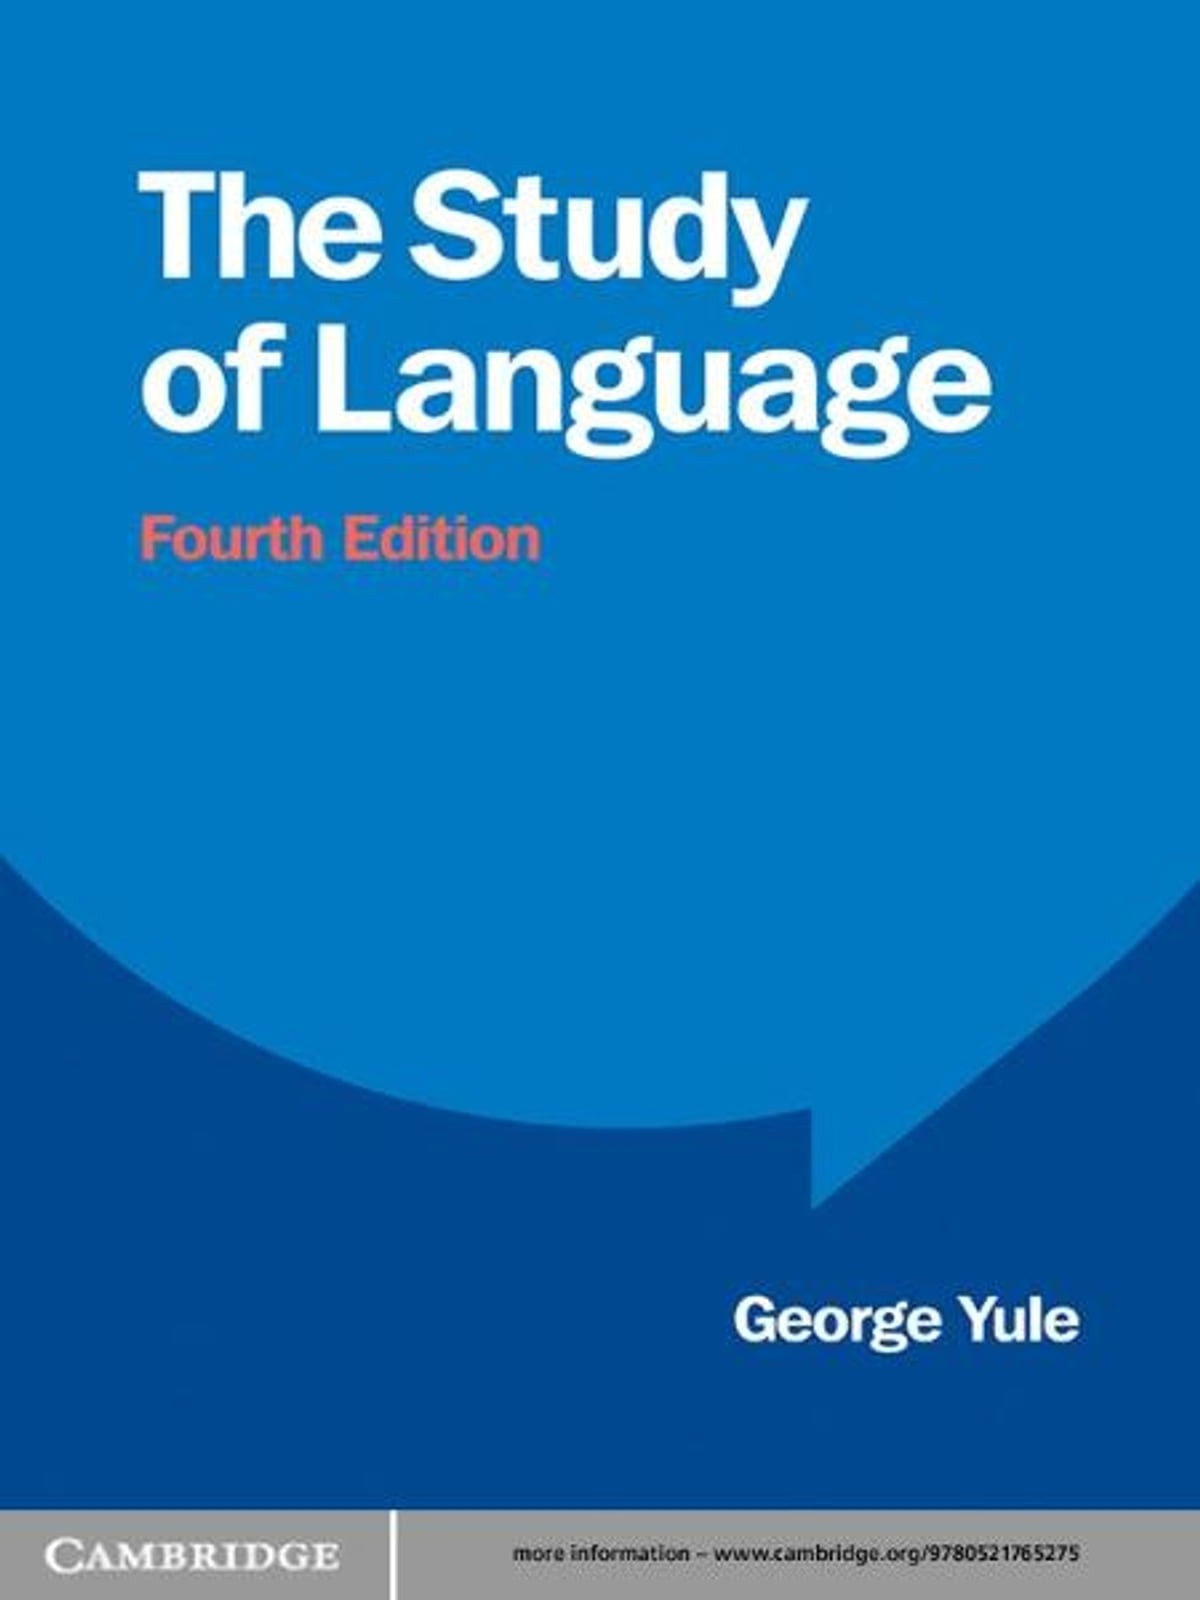 The Study of Language: An Introduction